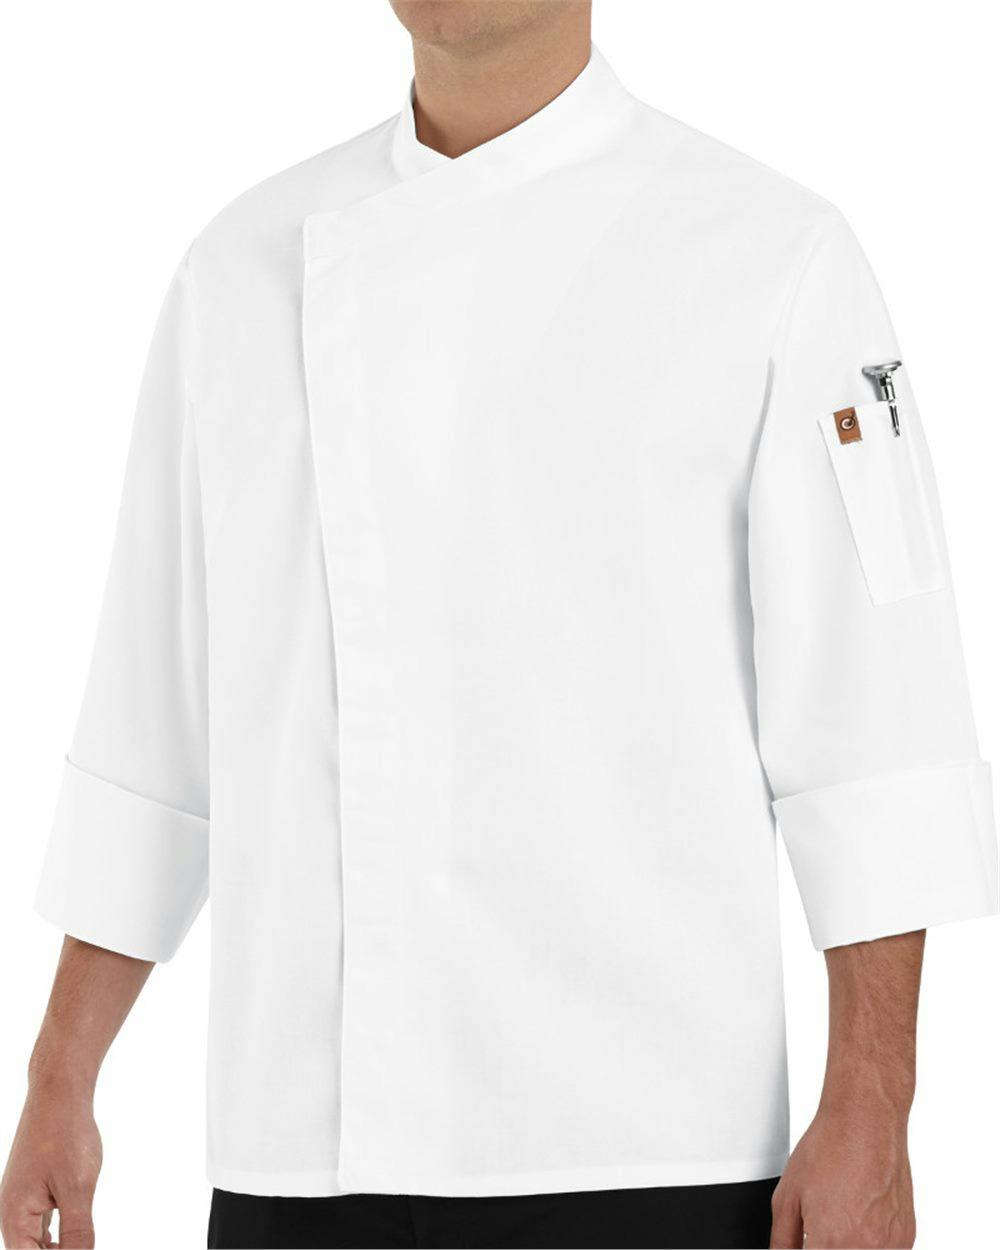 Image for Tunic Chef Coat - KT80